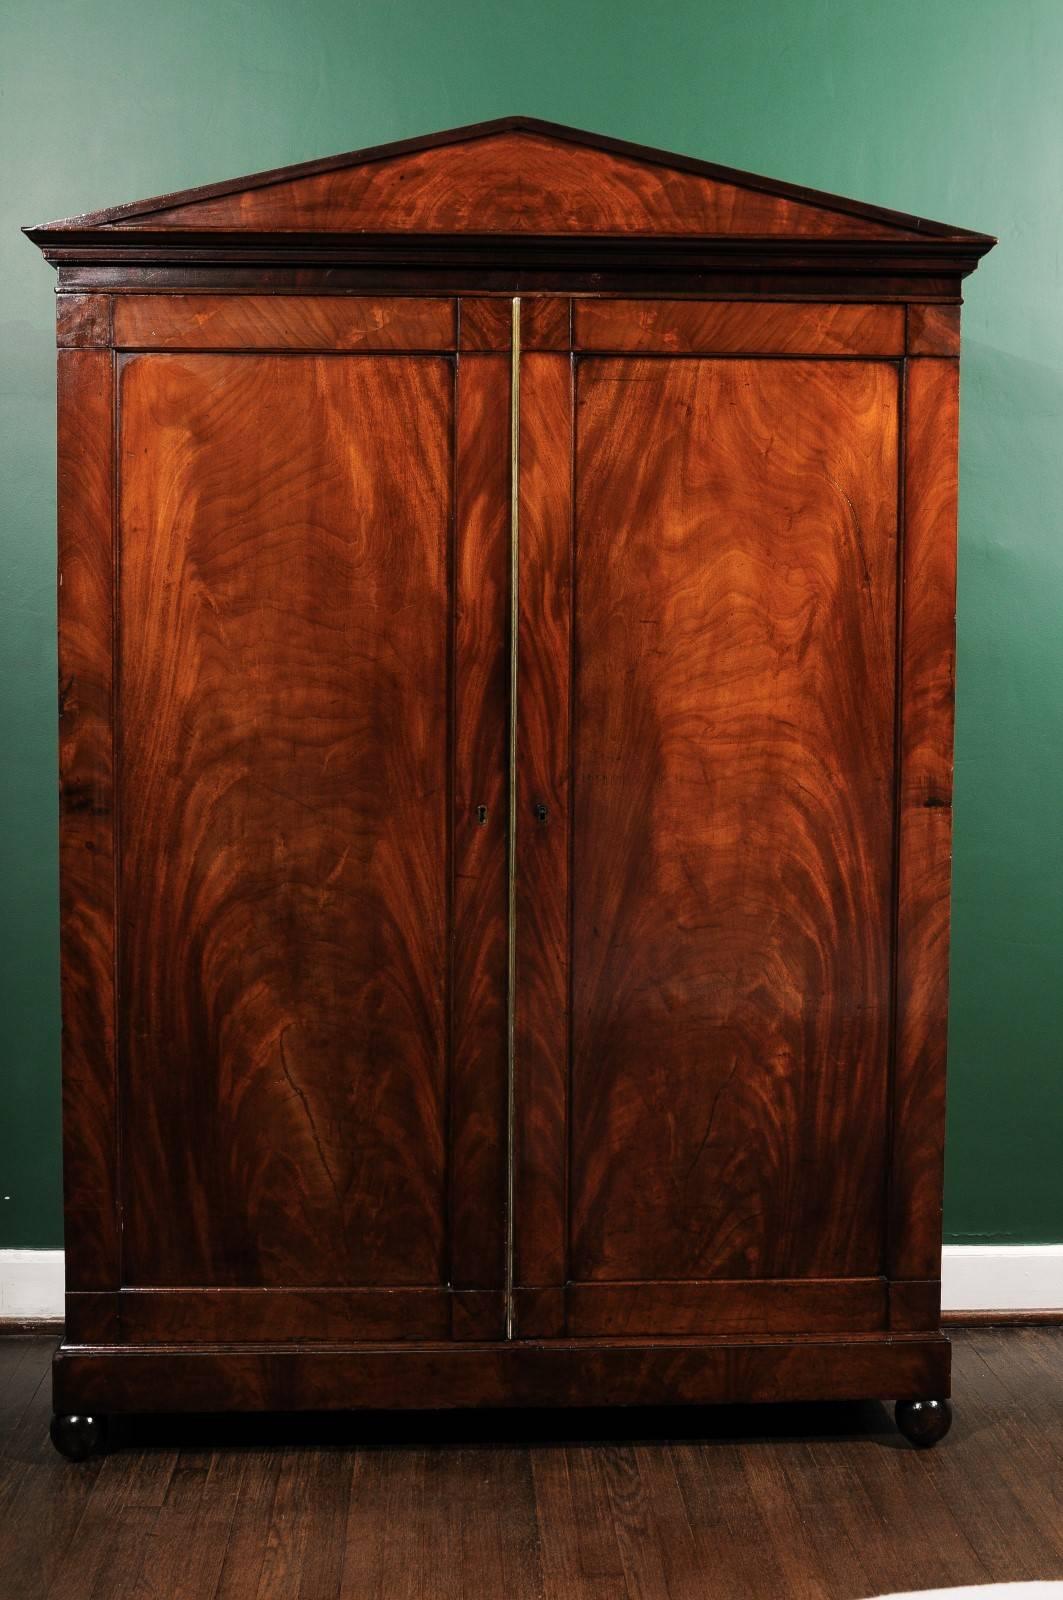 19th century French armoire of the Louis Philippe period covered in a flame mahogany veneer. The armoire has a triangular crown over two large doors with brass hardware that open to a fitted case. On the left are the original mahogany veneered